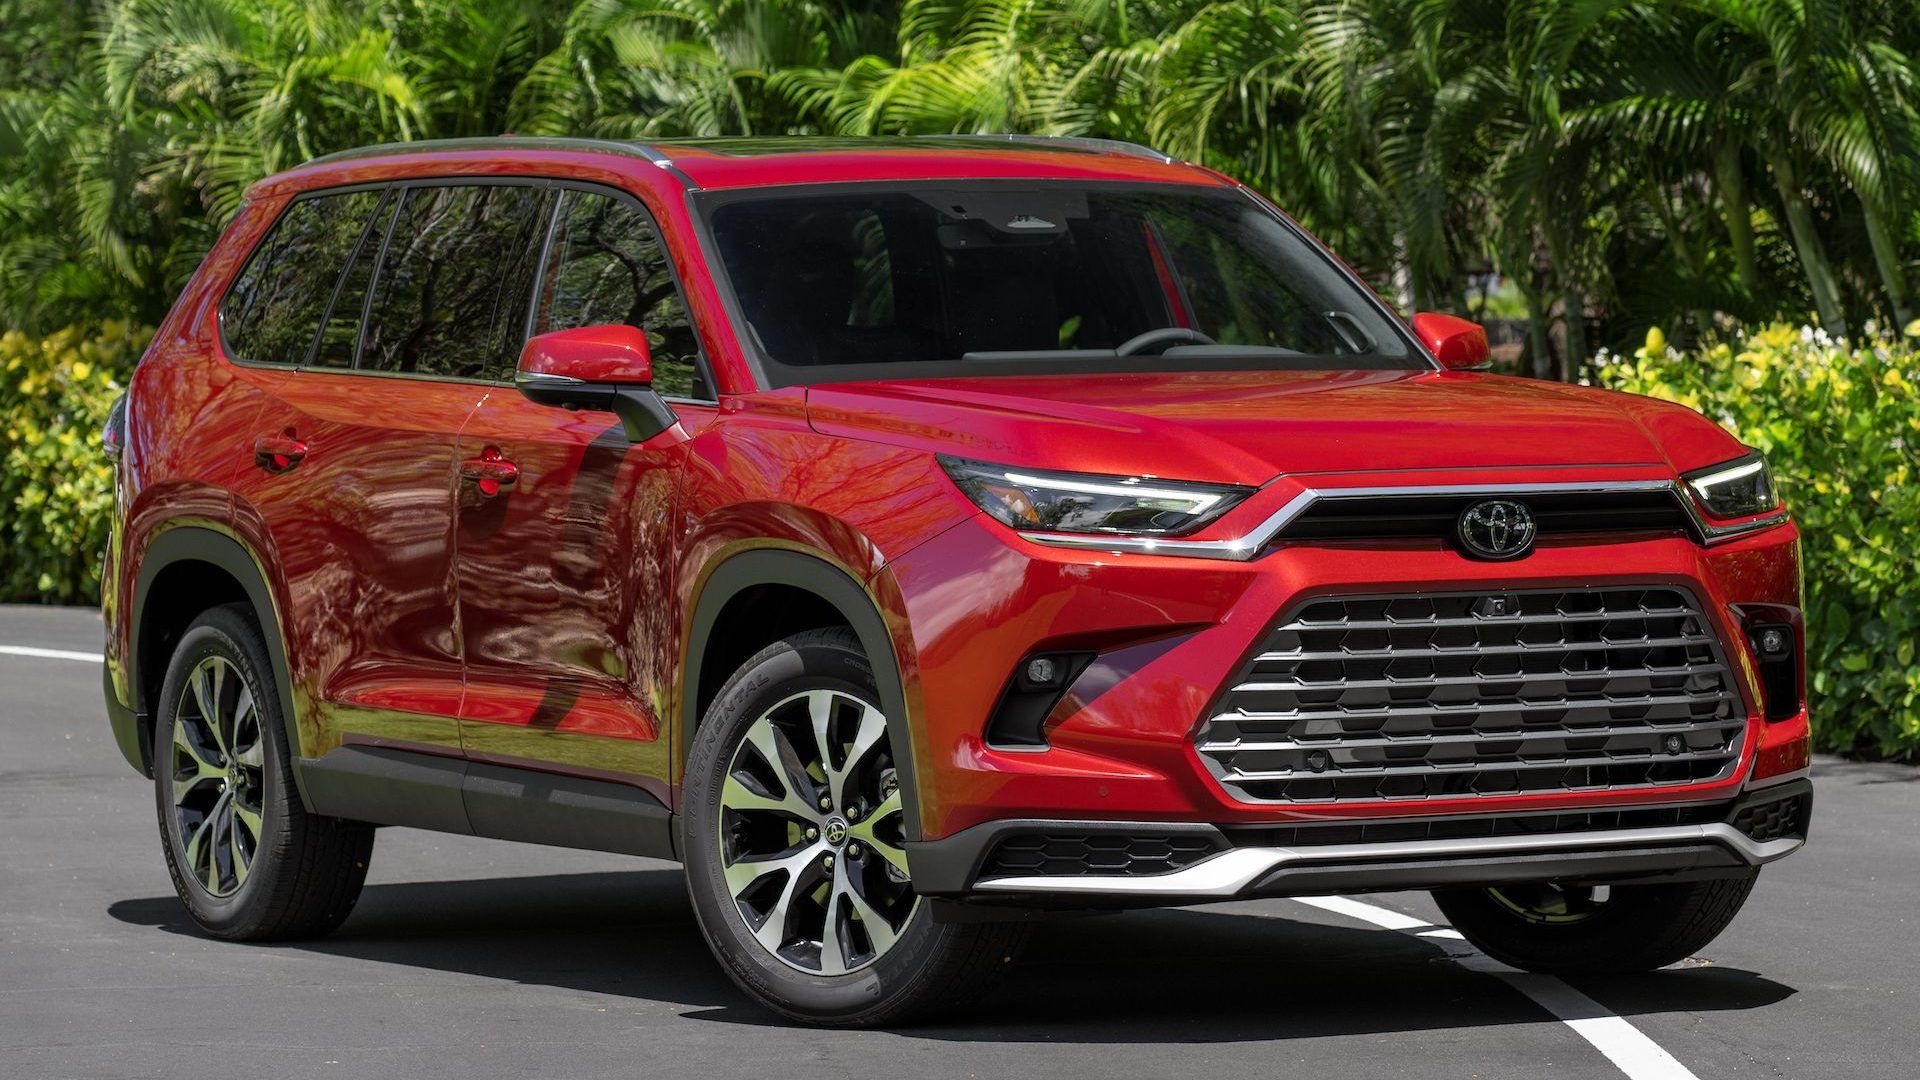 2021 Toyota Highlander Hybrid Review: An Actually Fuel Efficient Midsize  SUV